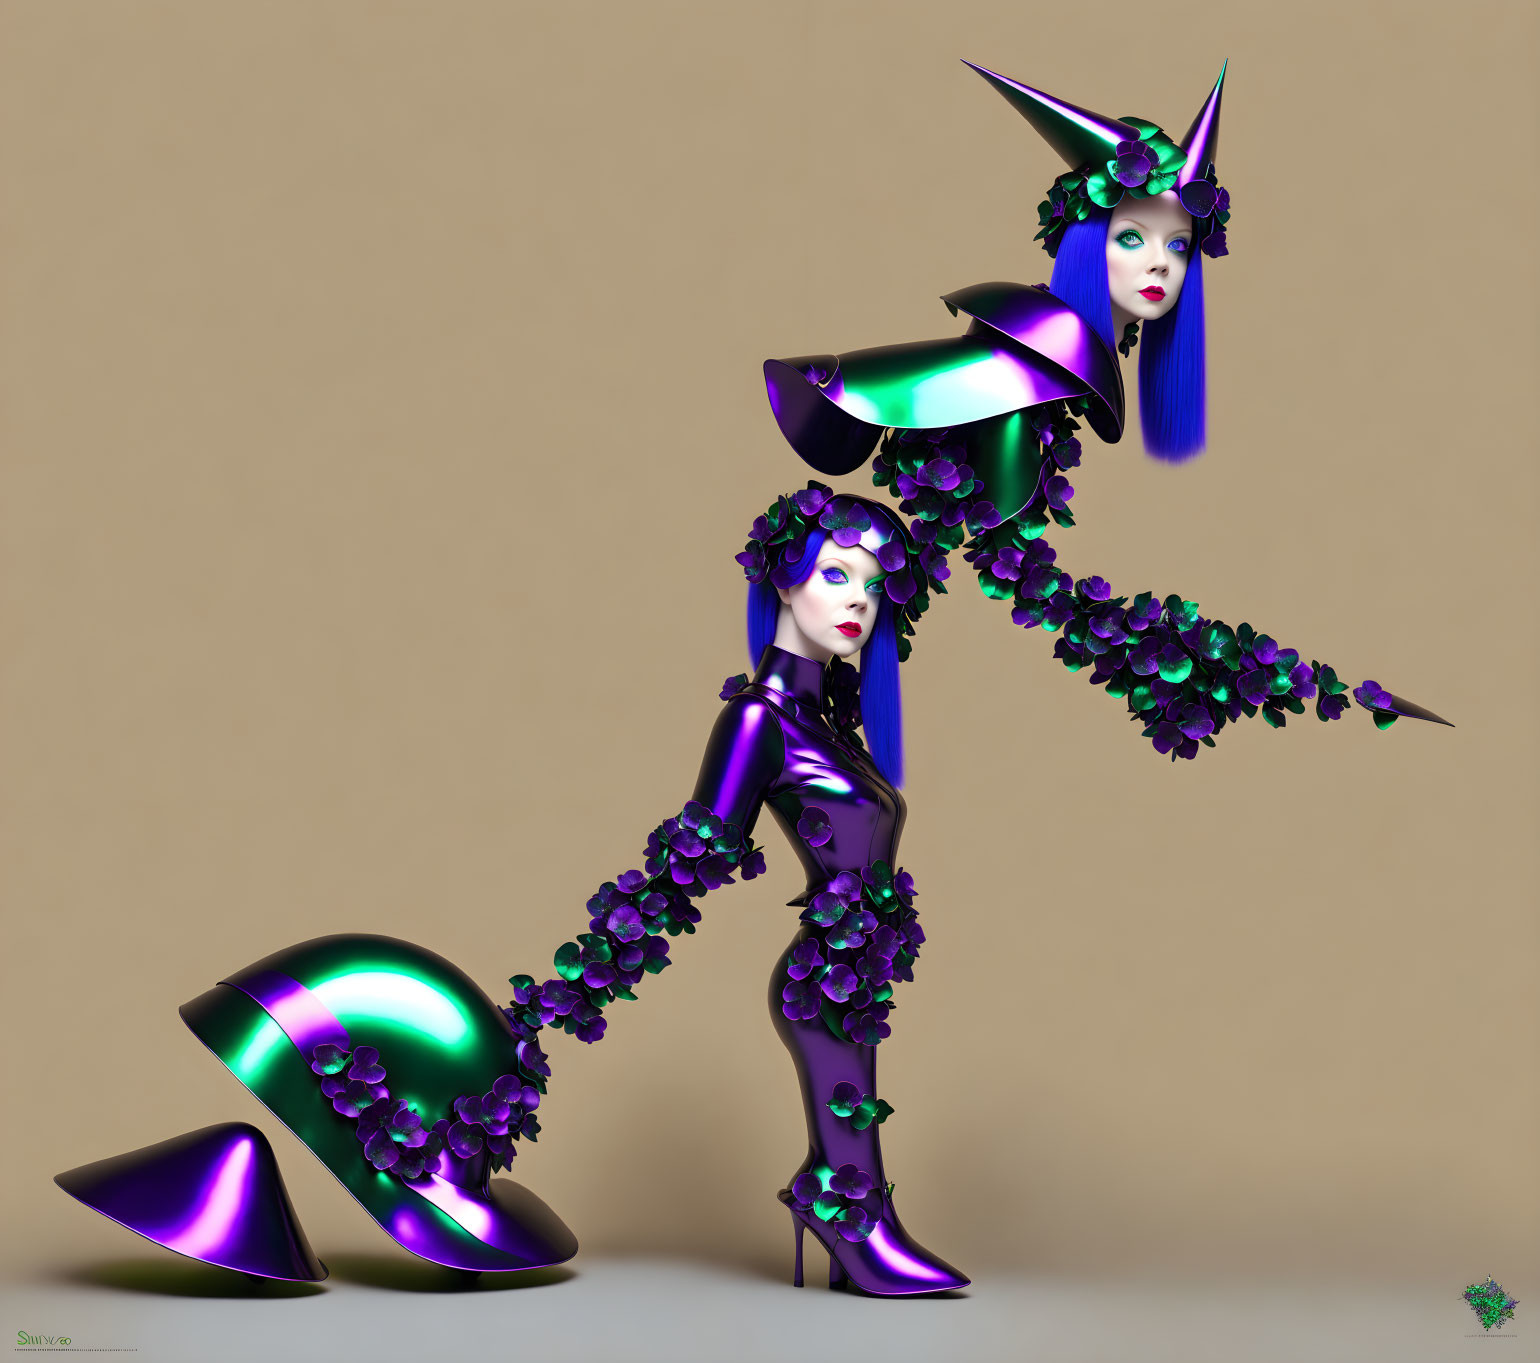 Colorful 3D female figure in purple and green fantasy armor with floral patterns